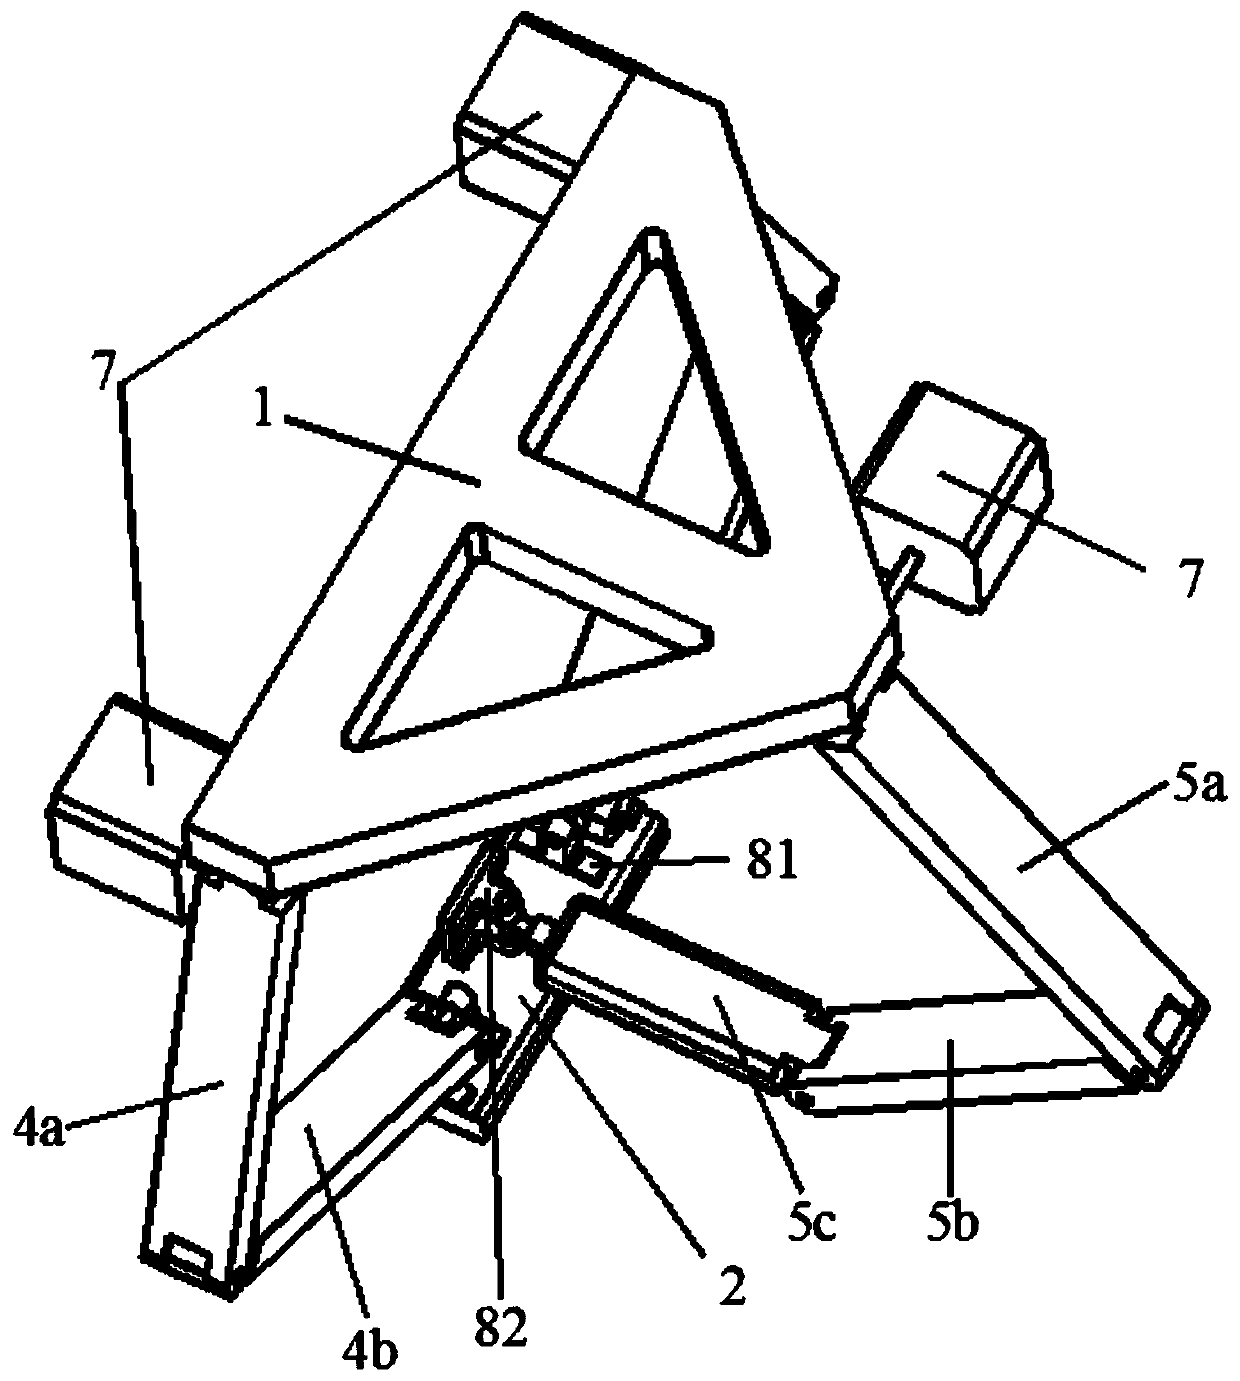 Three-degree-of-freedom parallel mechanism without accompanying movement